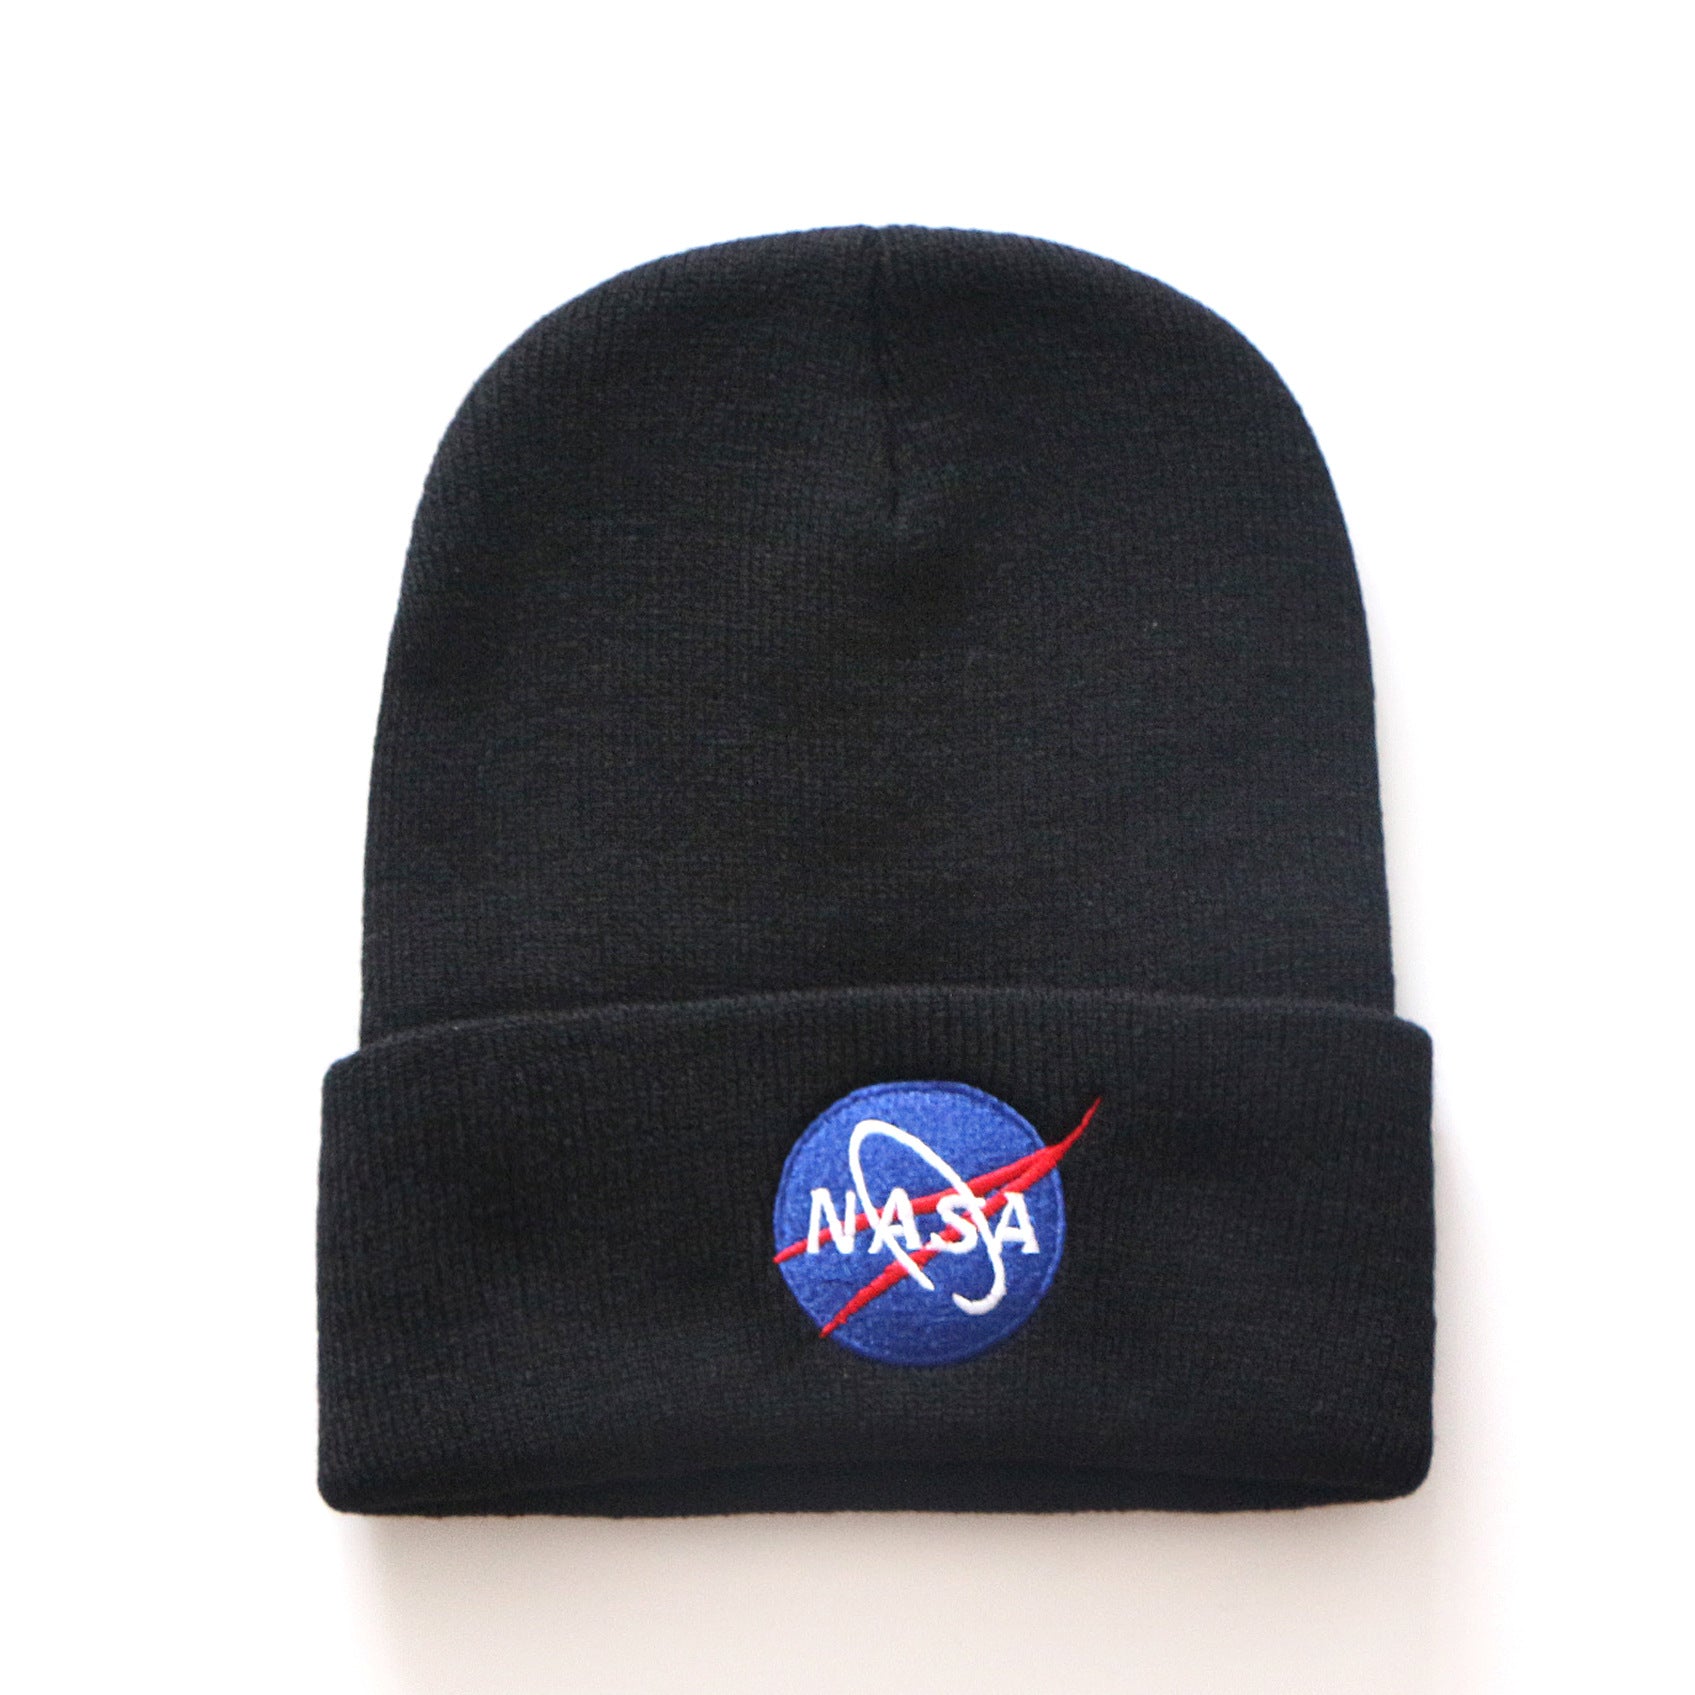 NASA Embroidered Knitted Beanie